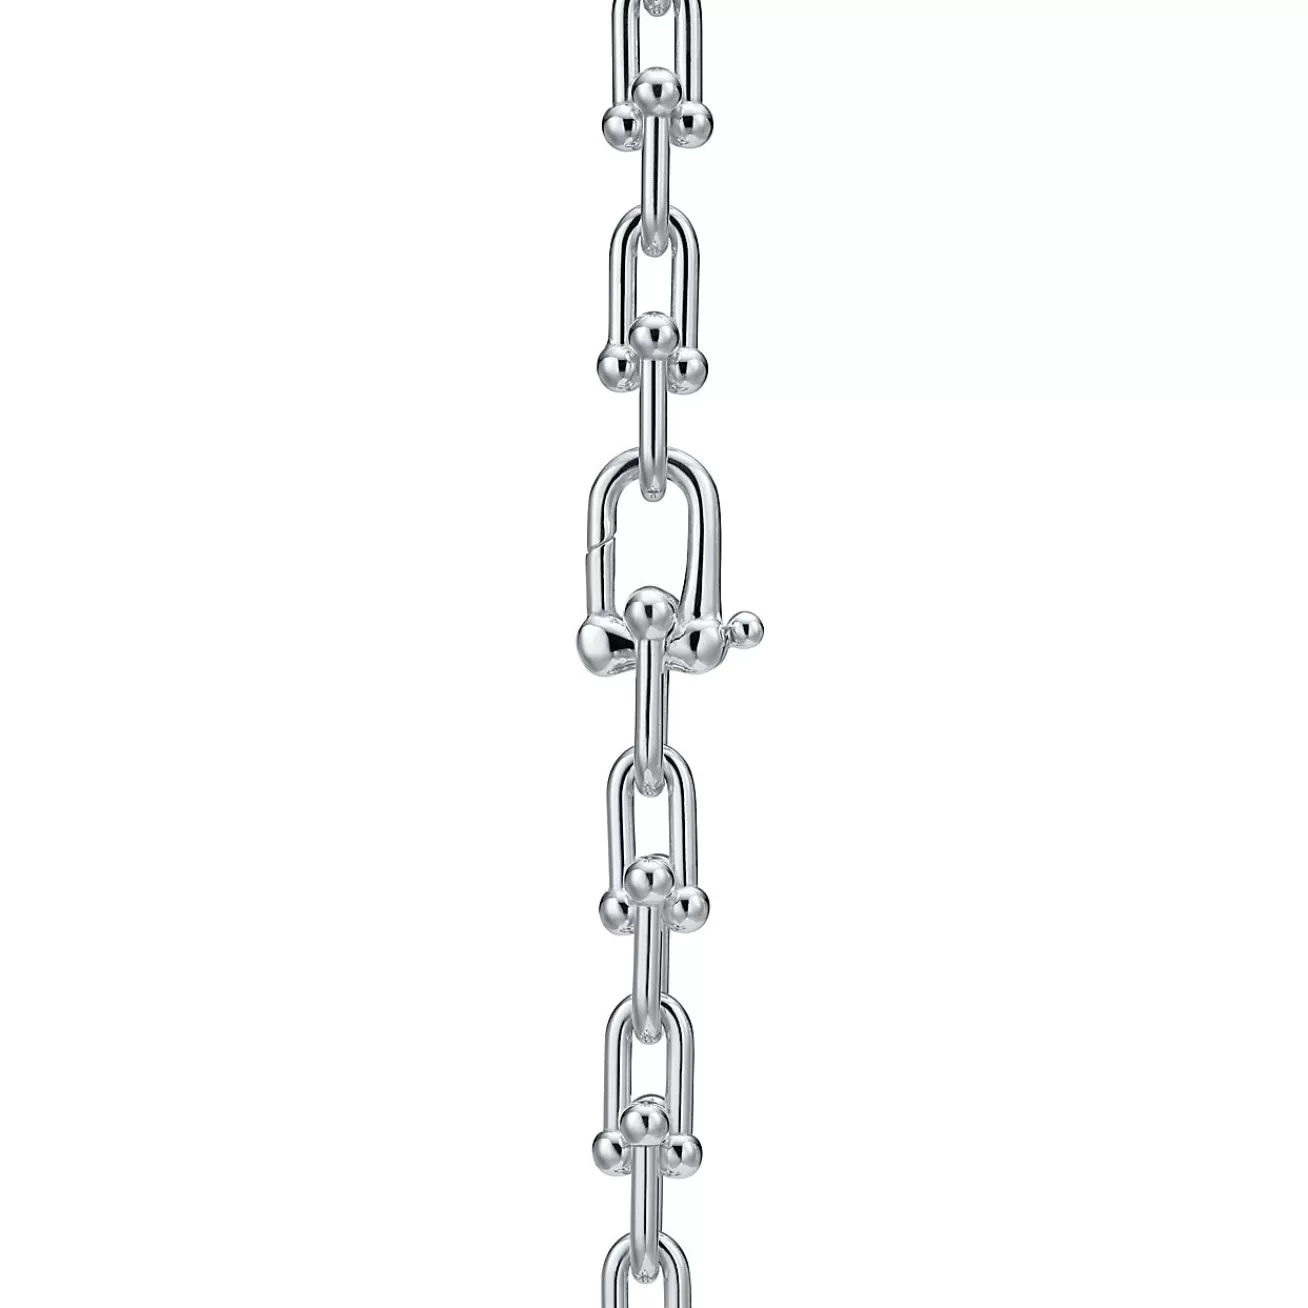 Tiffany & Co. Tiffany HardWear Small Link Necklace in Sterling Silver | ^ Necklaces & Pendants | Men's Jewelry